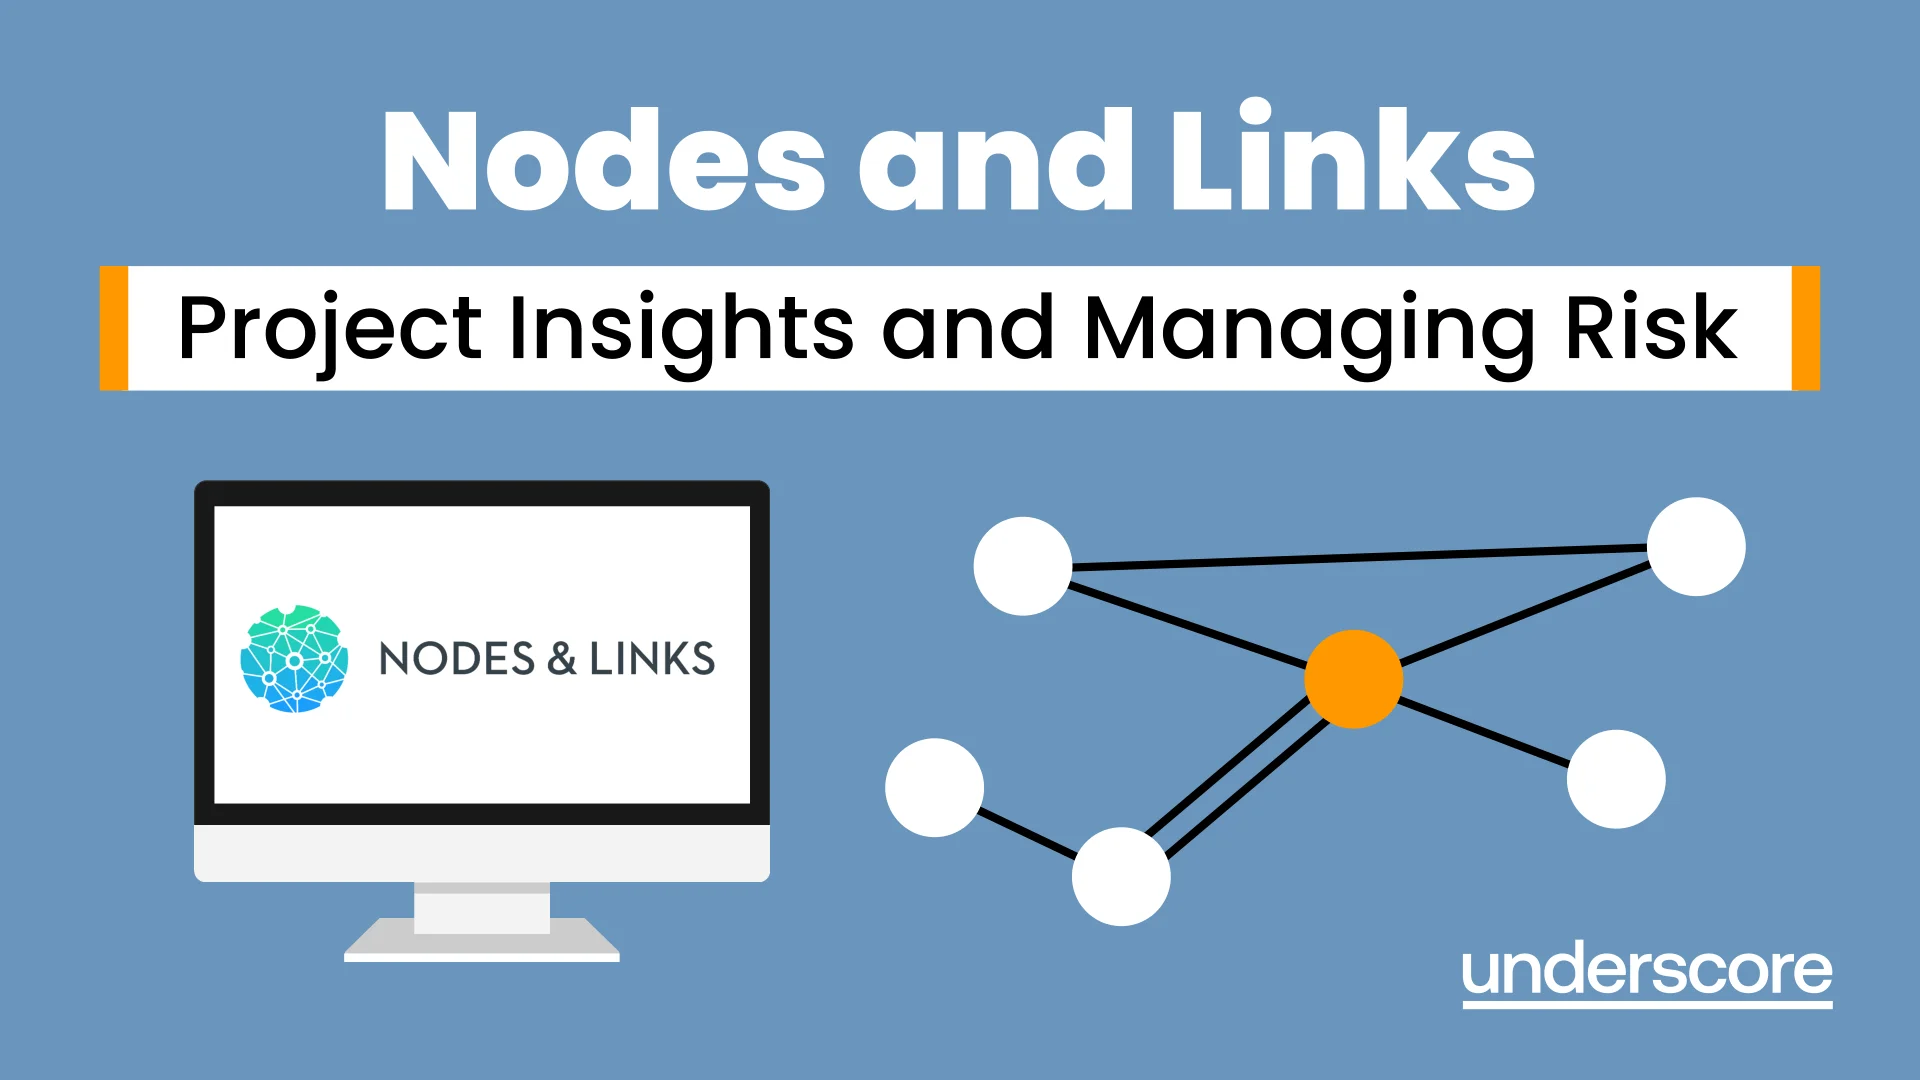 Nodes and Links Project Insights and Managing Risk